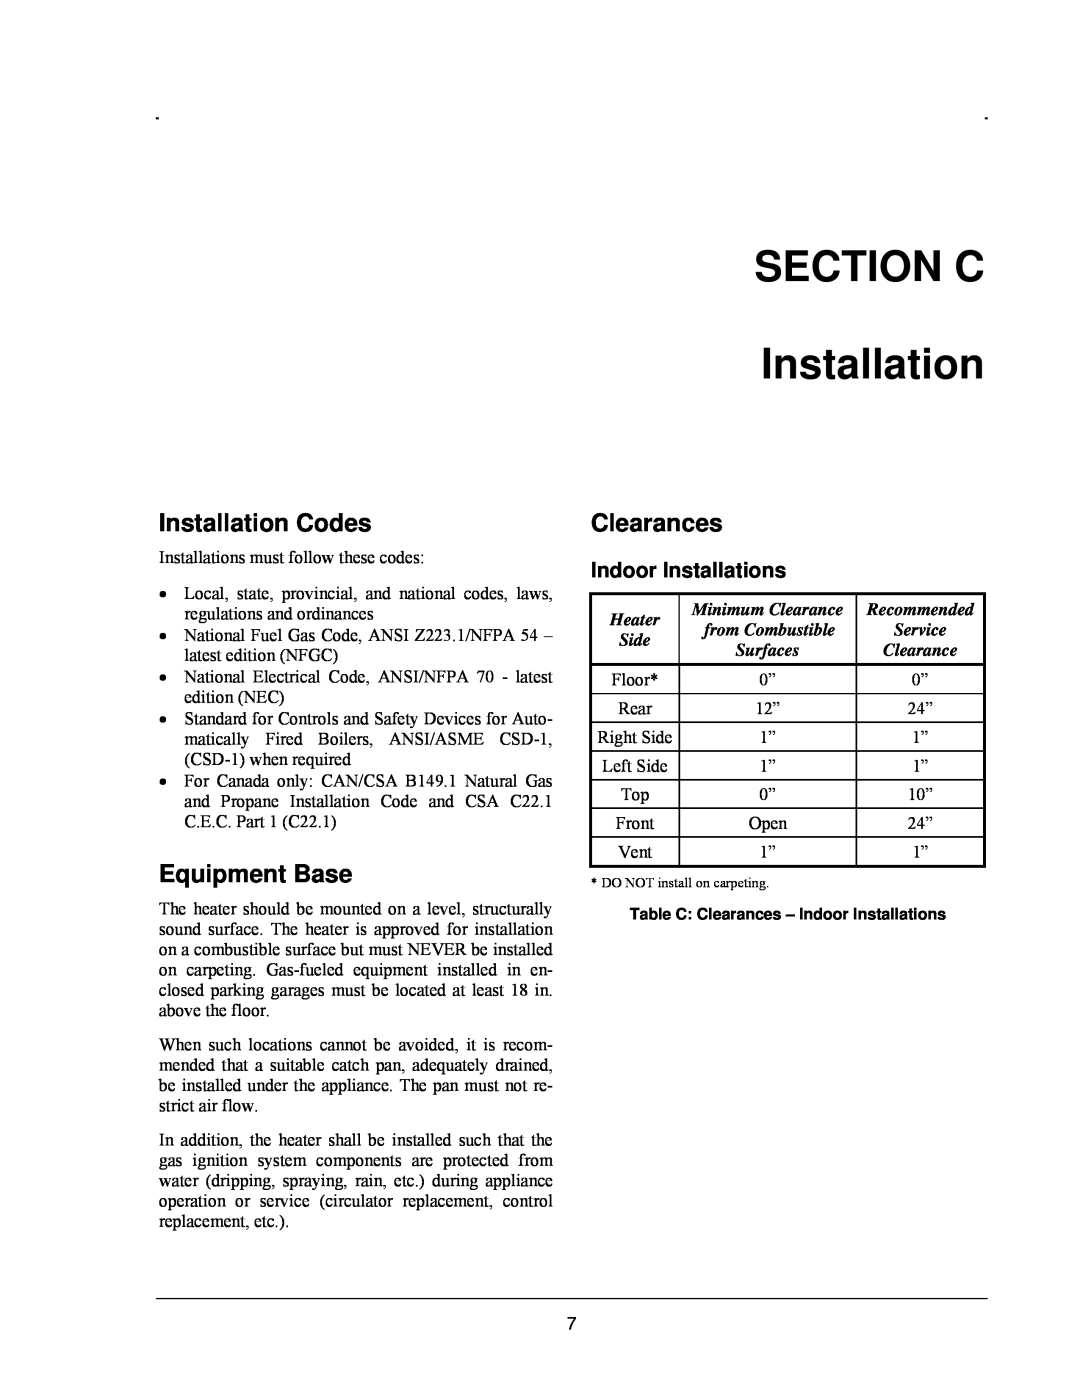 Raypak 503-2003 manual SECTION C Installation, Installation Codes, Equipment Base, Clearances, Indoor Installations 